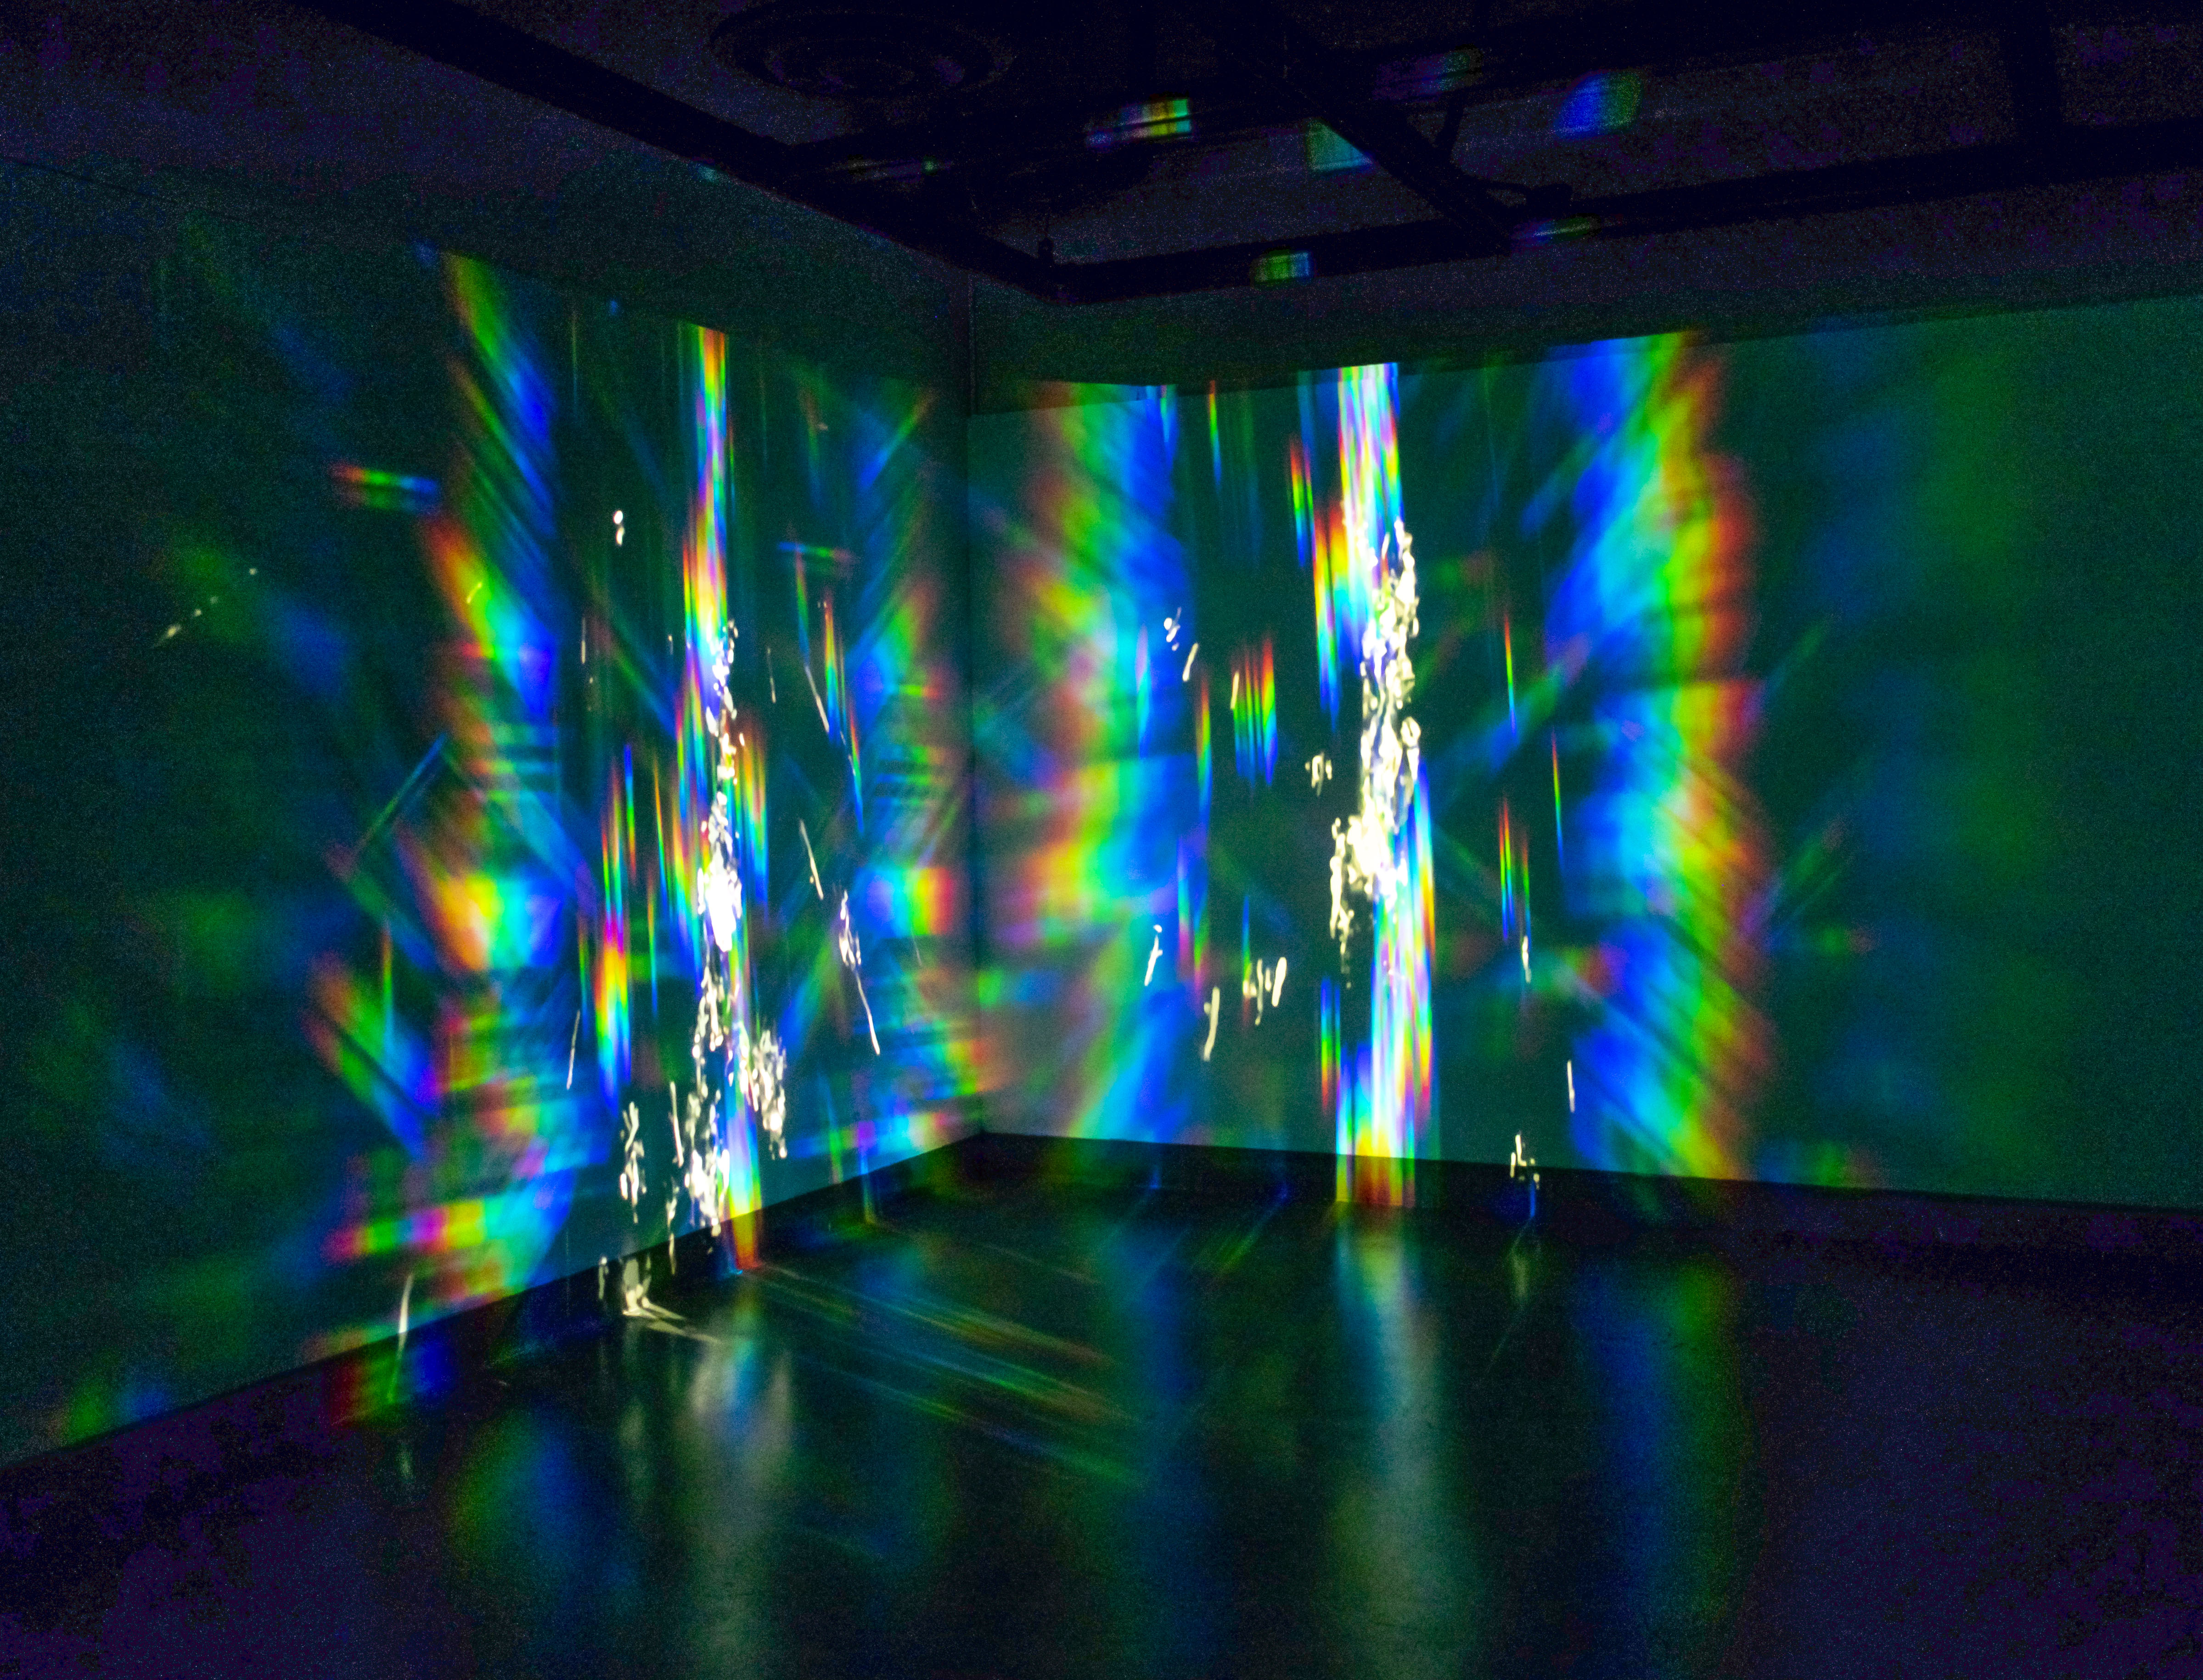 West of gallery, Exhibition: Sasha vom Dorp: 15.15 Hz, Aug. 23 - Oct. 18, 2018, Curator: Michele Cairella Fillmore, W. Keith & Janet Kellogg Art Gallery, Cal Poly Pomona. [15.15 Hz consists of images, as well as interactive light-based, multisensory video sound installations that capture sunlight at 15.15 Hz (Photo Credit: William W. Gunn)]